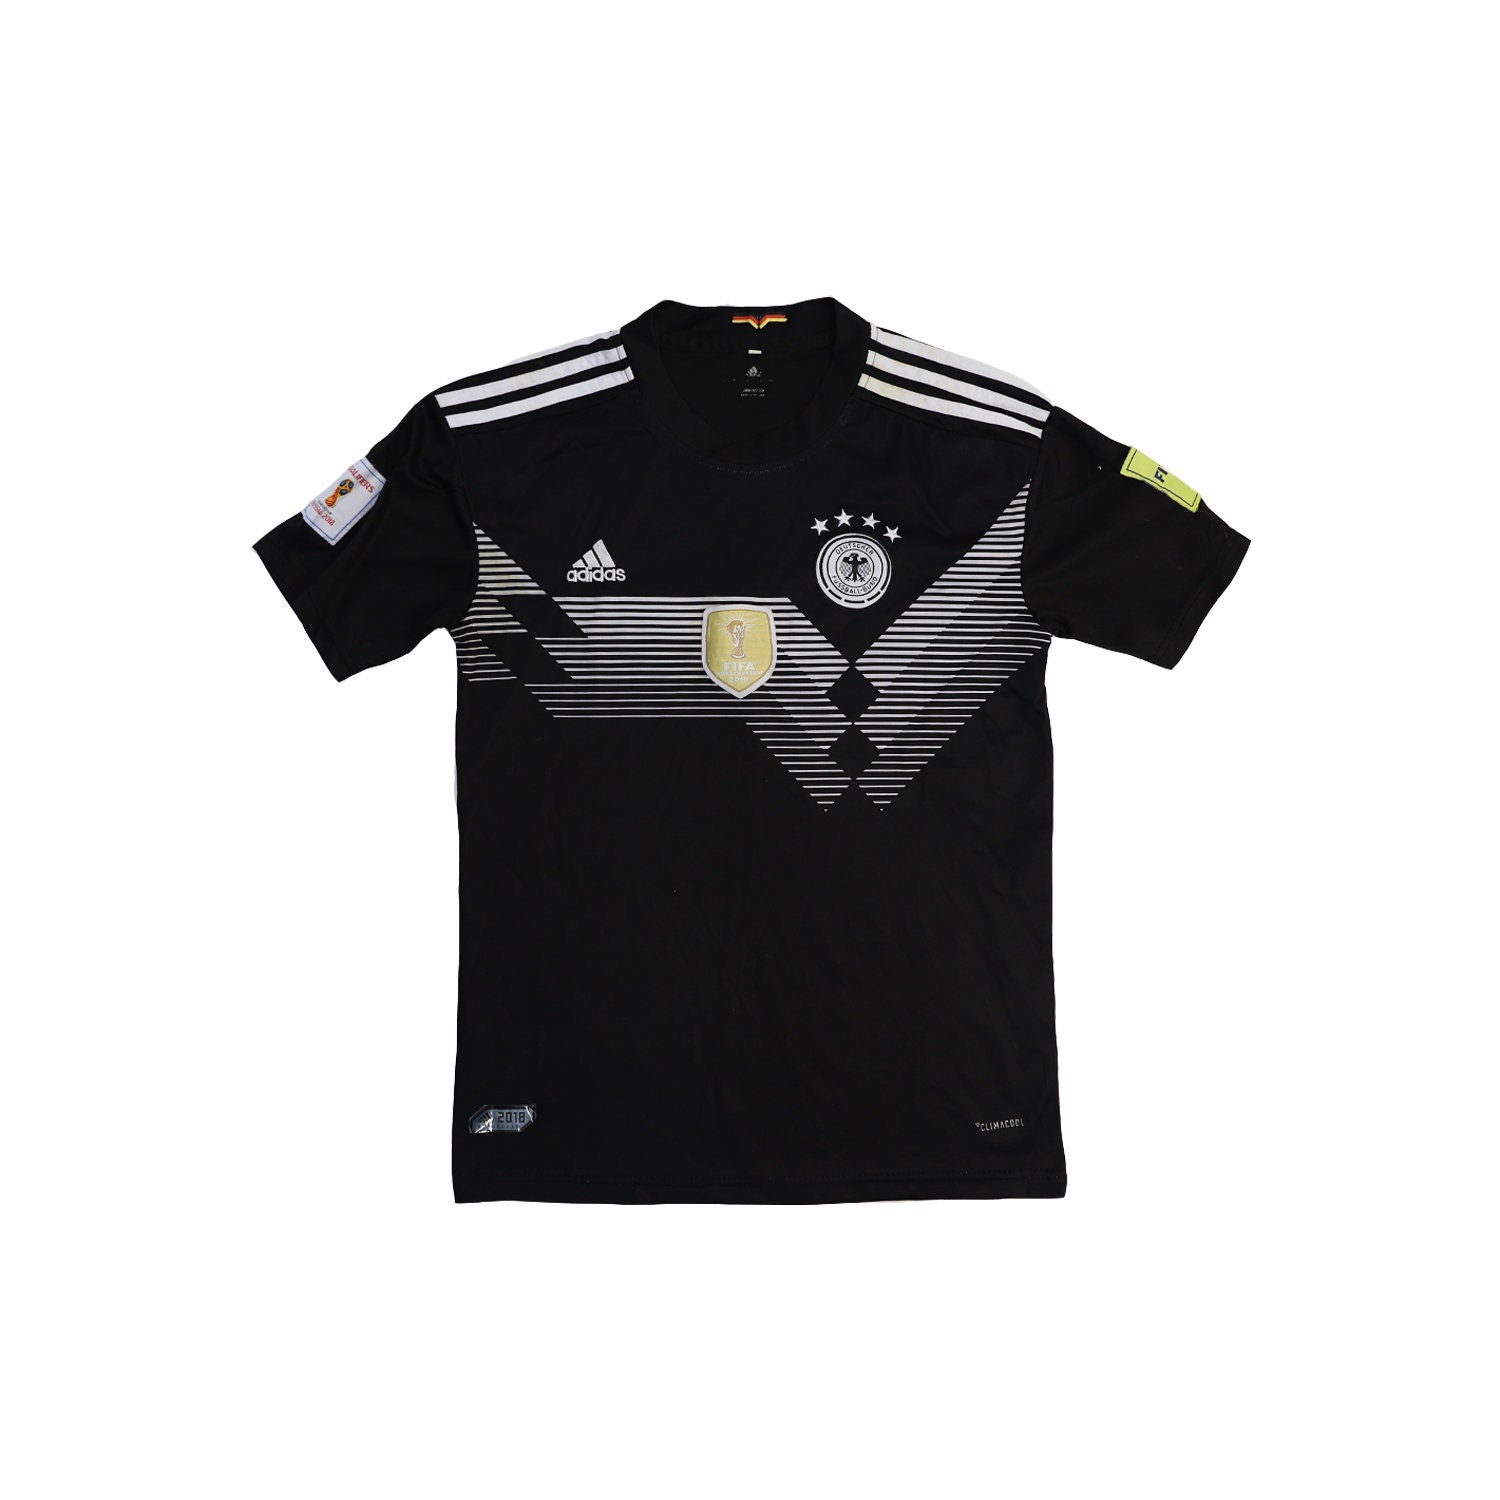 GERMANY 2014 WORLD CUP CHAMPION 4TH TITLE IN BRAZIL AWAY JERSEY ADIDAS  CLIMACOOL SHIRT TRIKOT MEMORABILIA SMALL SOLD OUT!!!